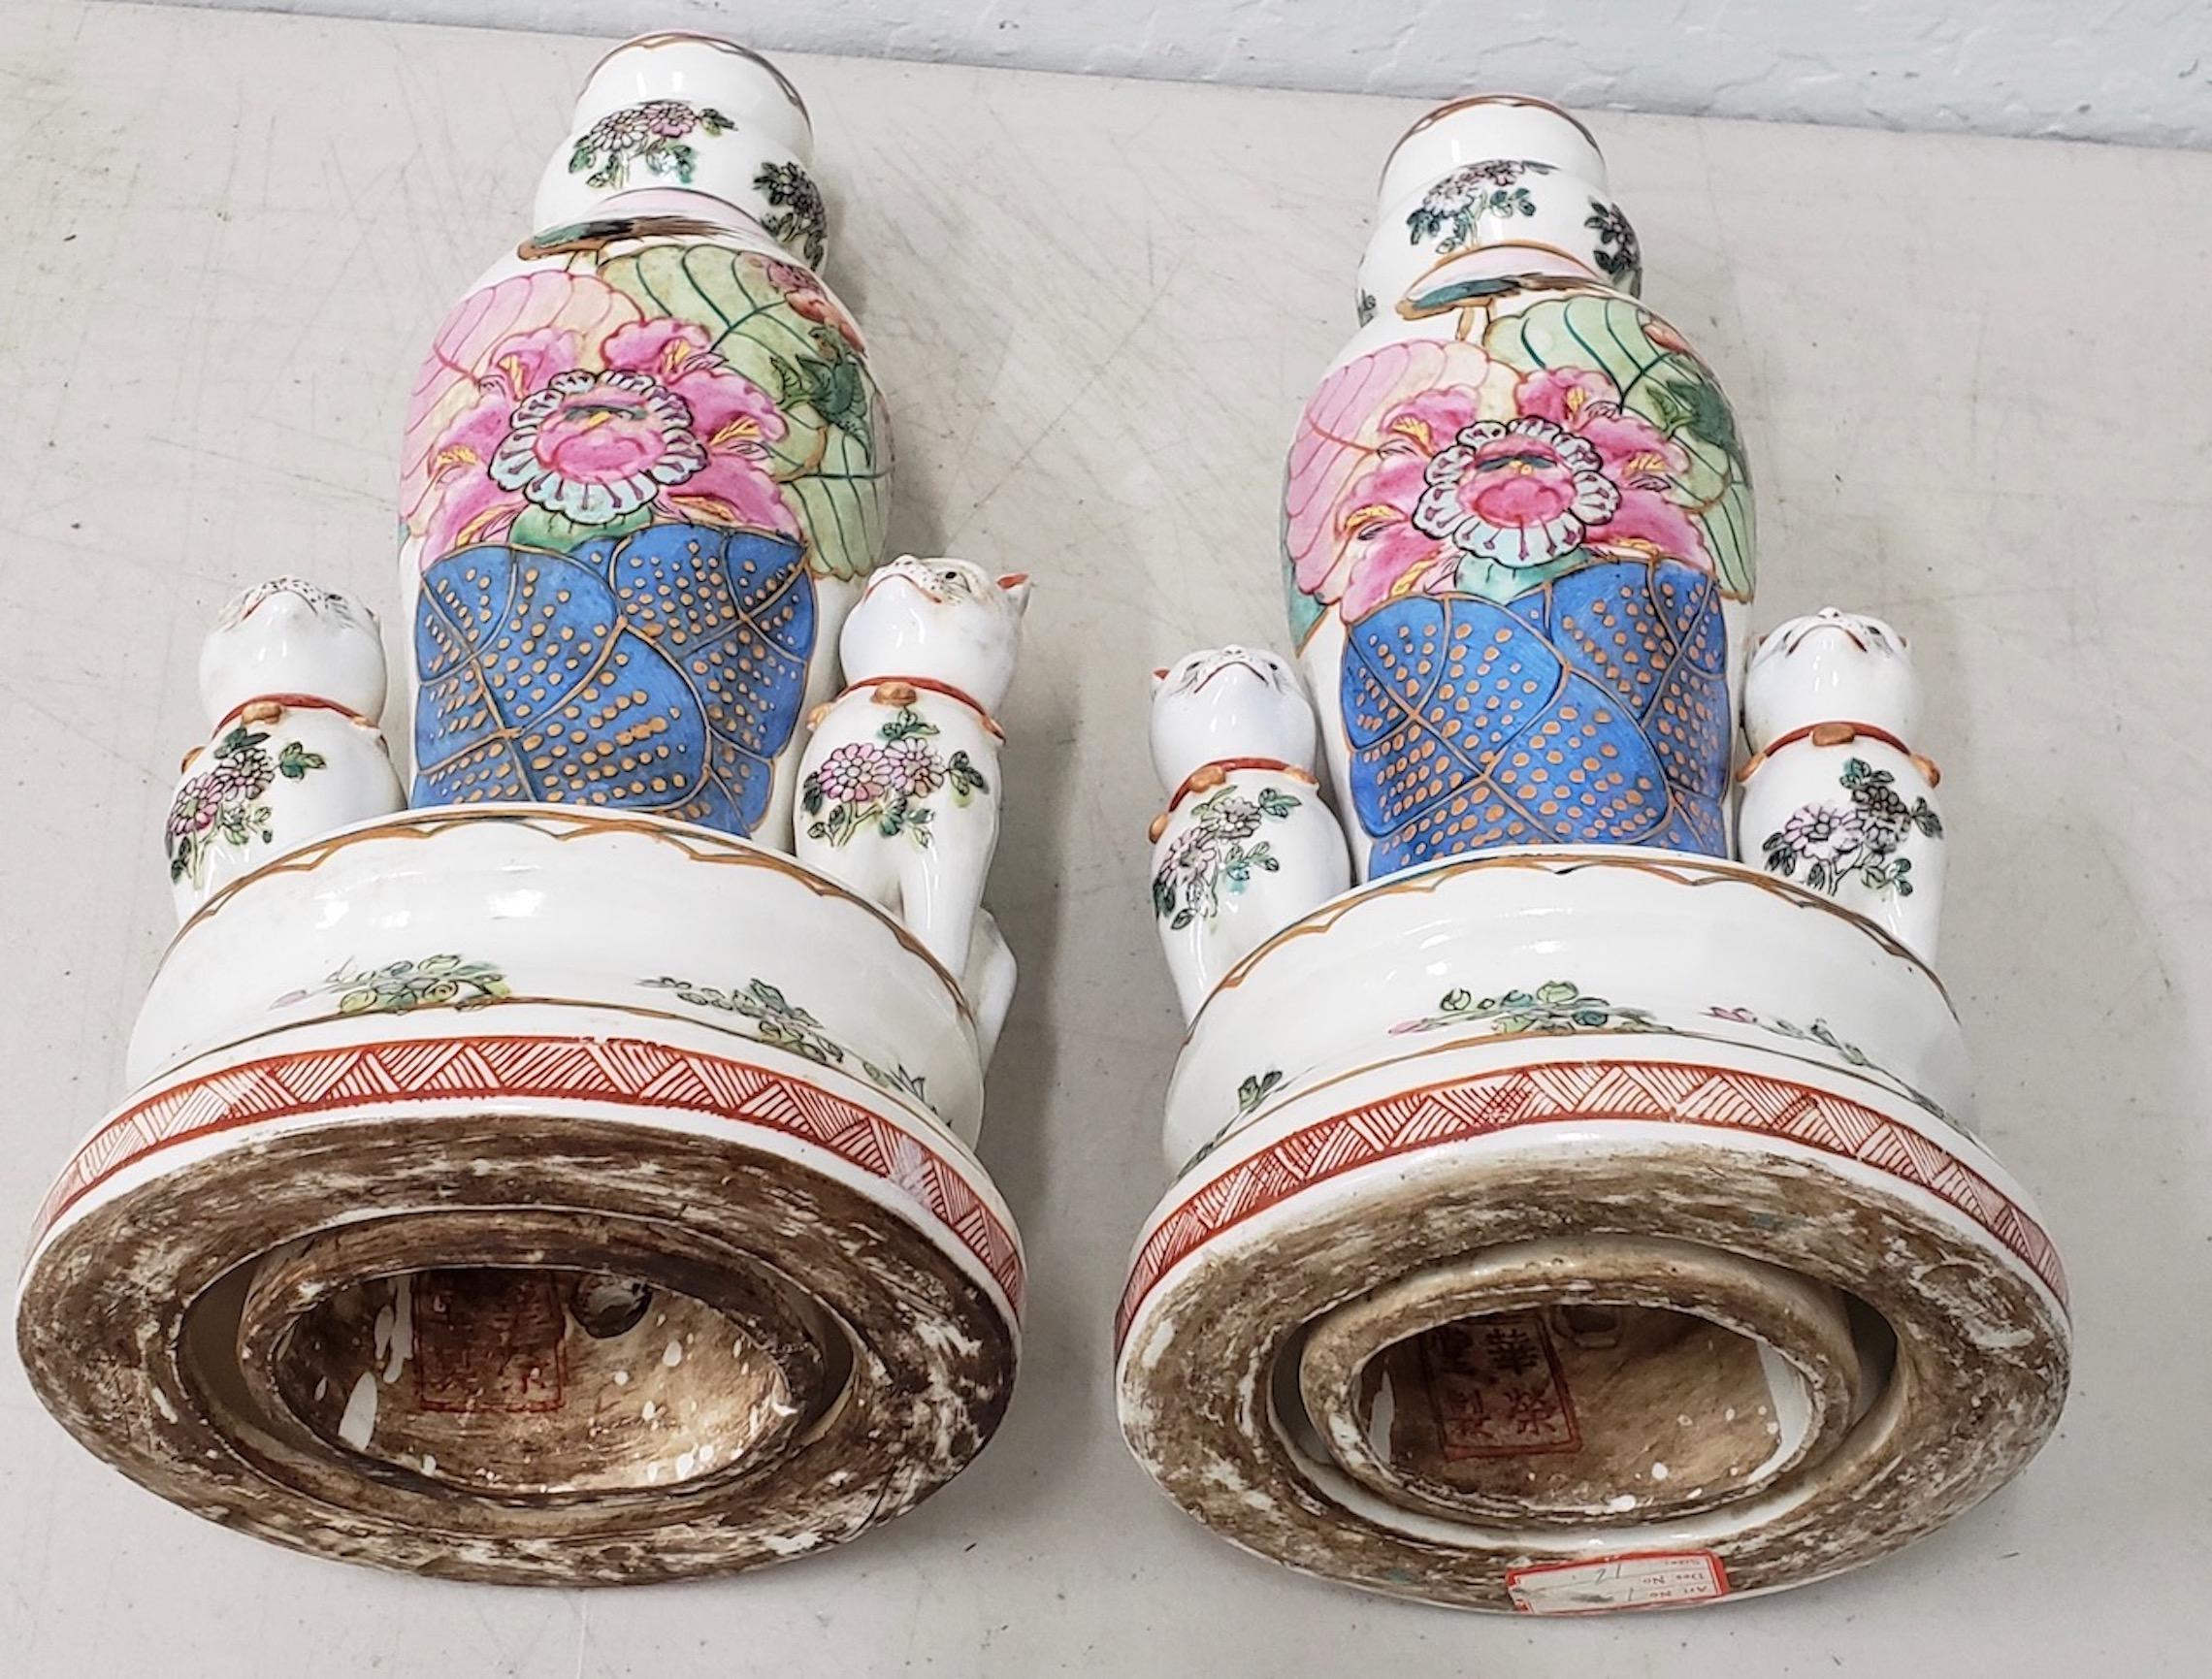 Pair of Early to Mid-20th Century Chinese Porcelain Figurines with Cats 5